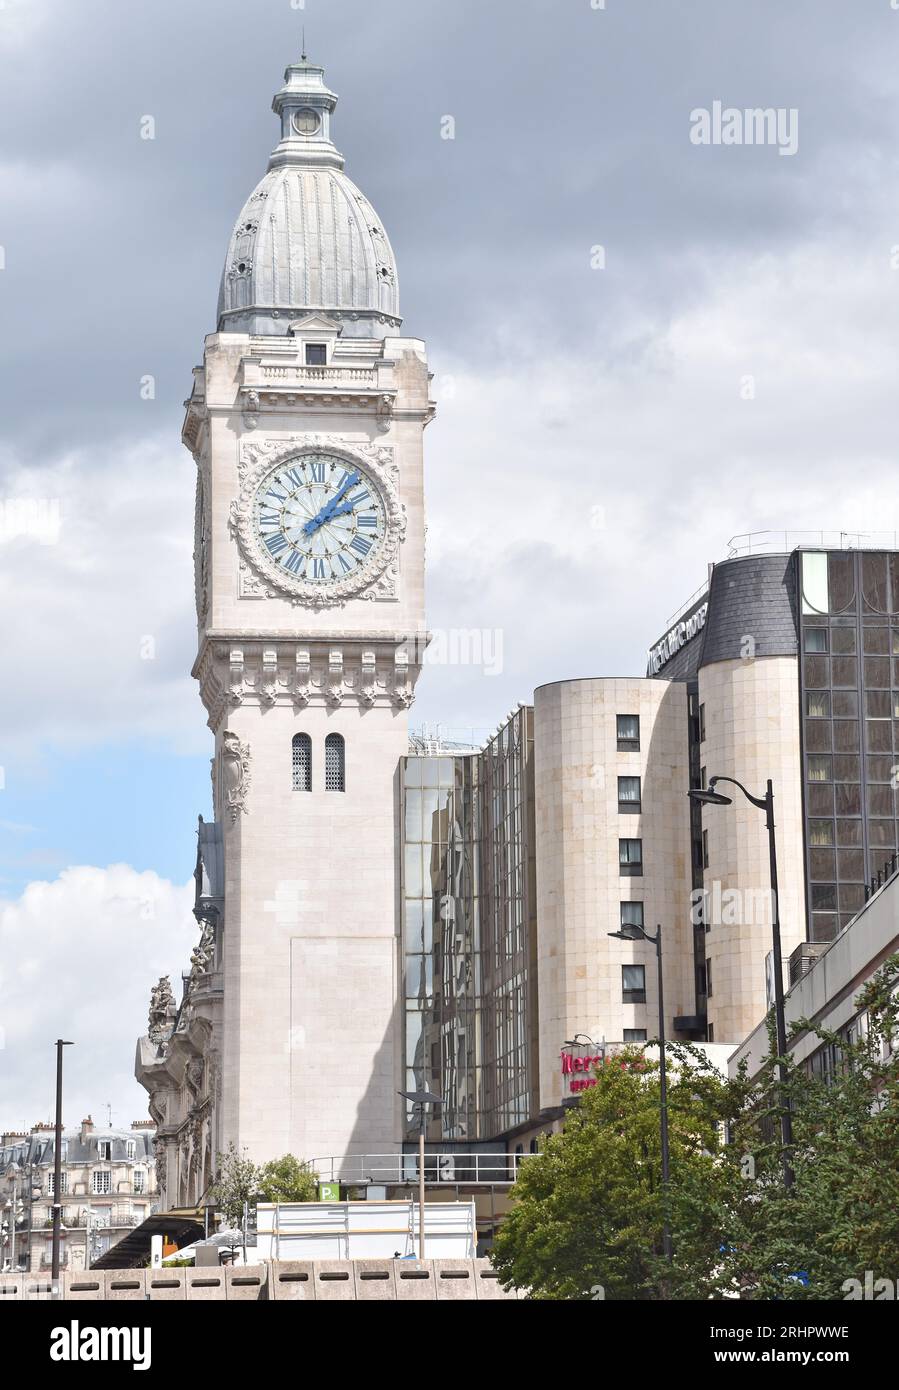 The famous, elaborately decorated clock tower of the Gare de Lyon, Paris, built for the PLM Co., built 1891-1902, spoiled by new hotel building Stock Photo